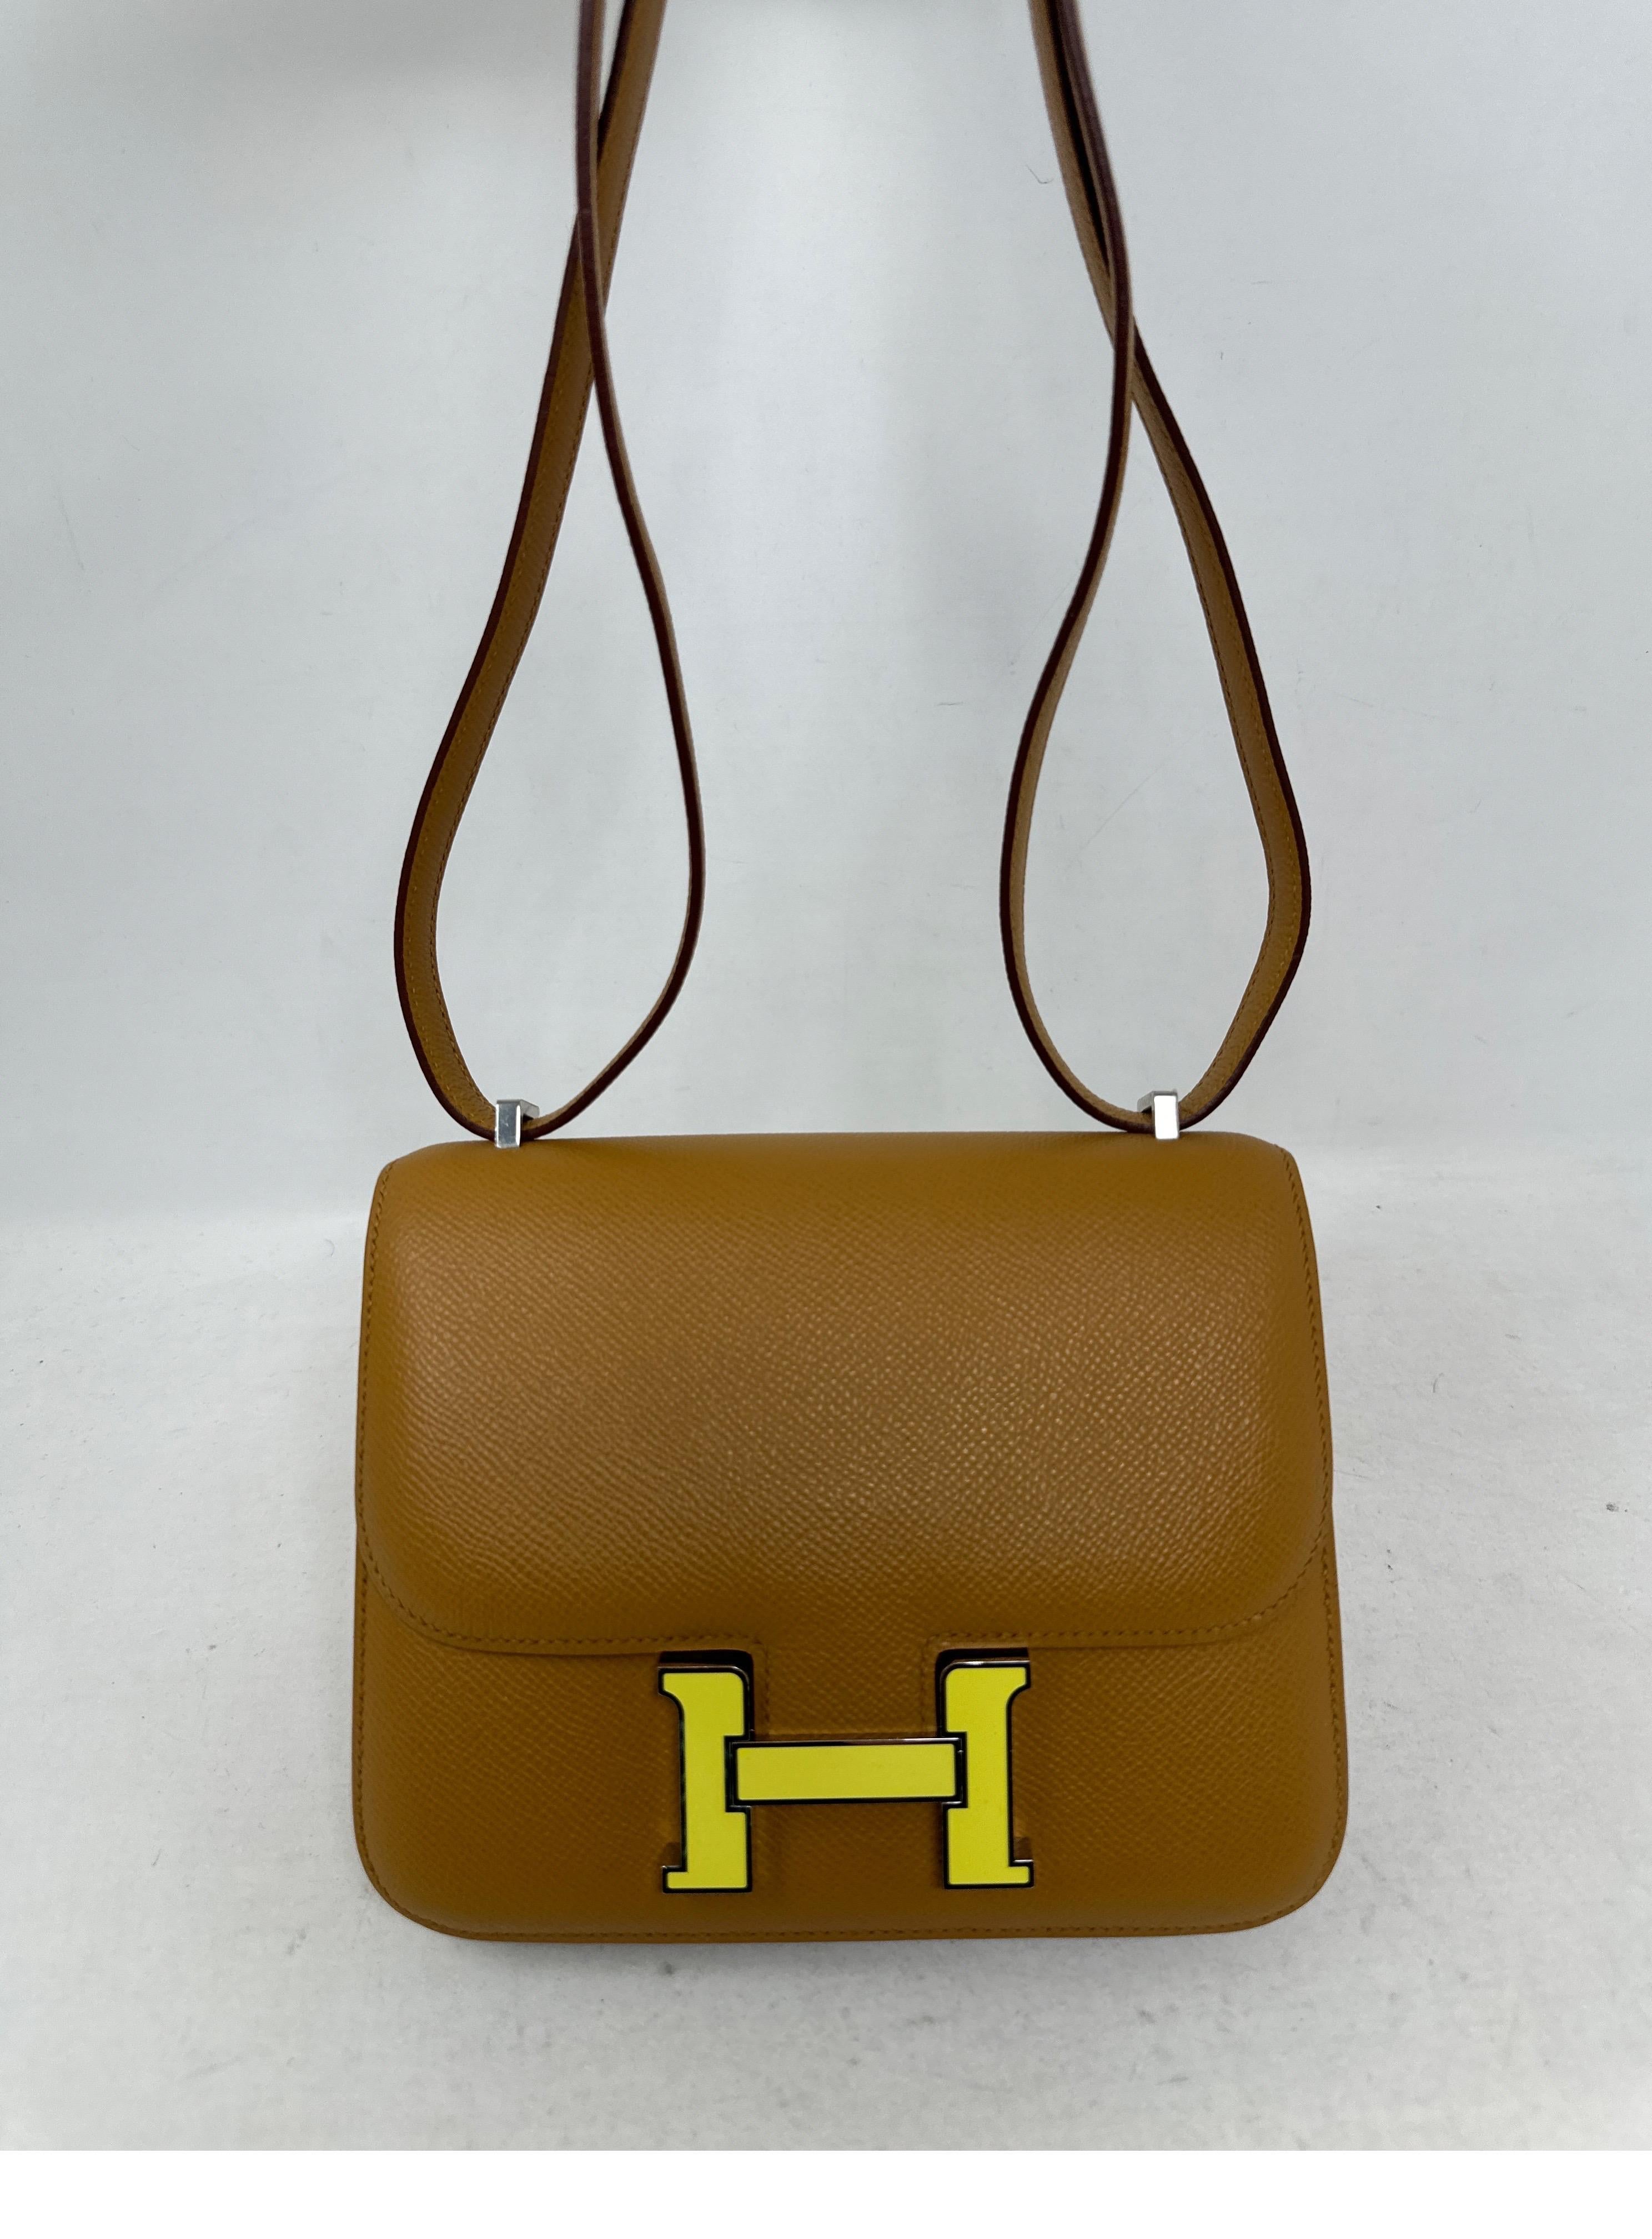 Hermes Mini Constance Gold Bag with yellow enamel hardware. Gold tan color leather with rare H closure. Constance 18 size. Excellent condition. Like new. Interior clean. Full set. Dust bag and box included. Guaranteed authentic. 